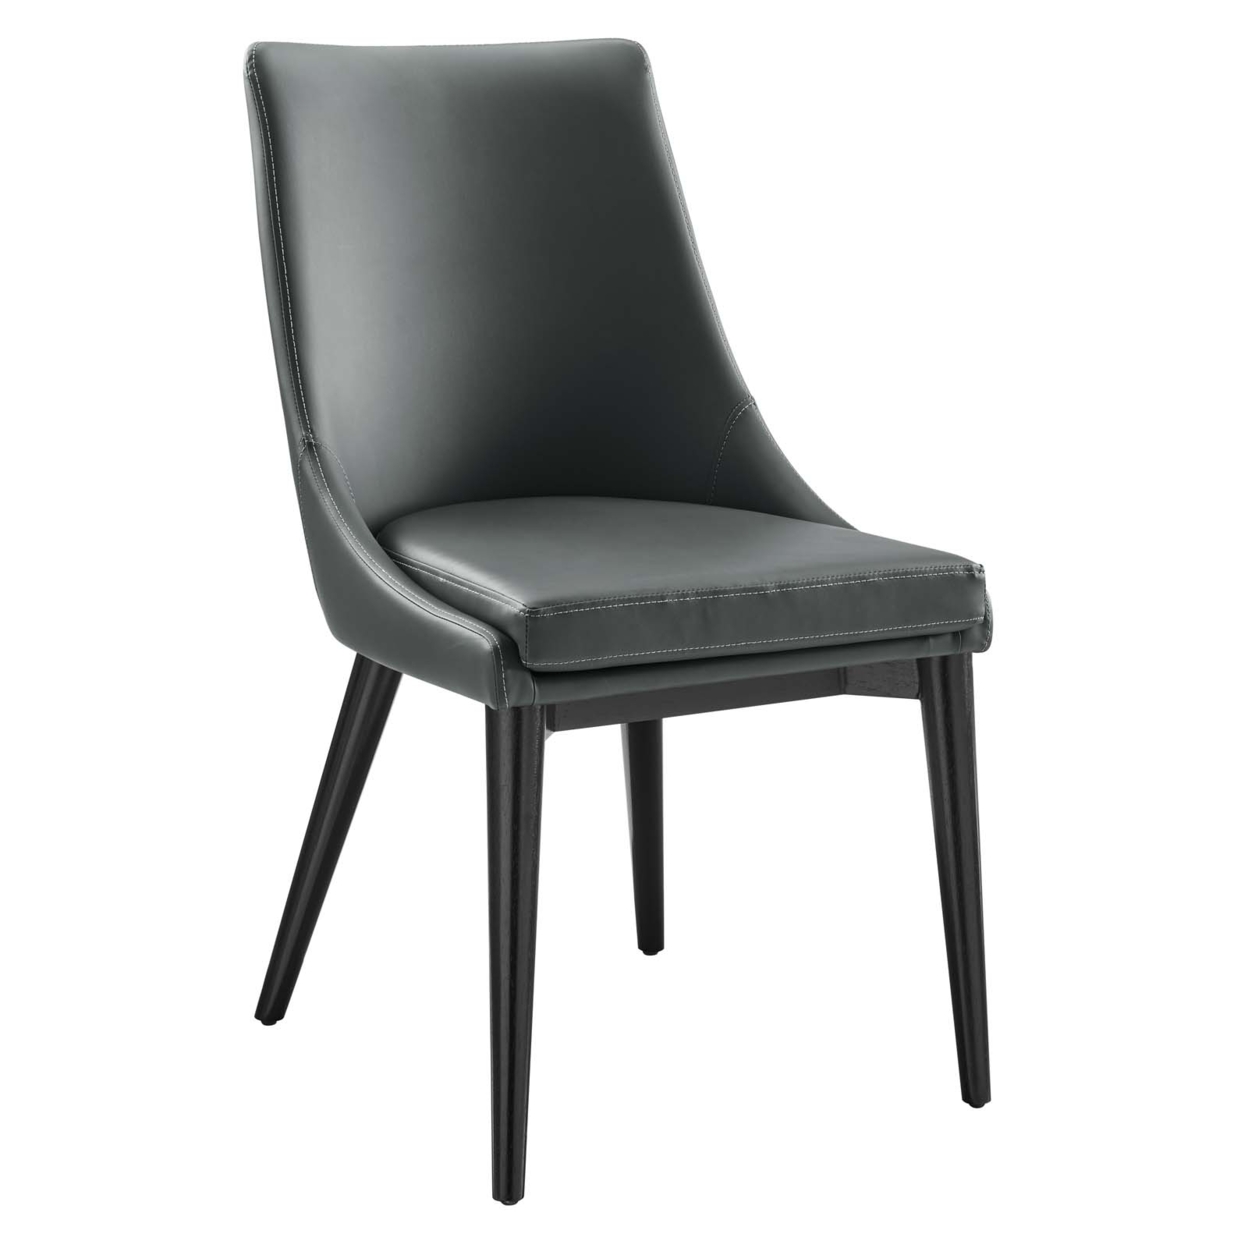 Viscount Vegan Leather Dining Chair, Gray